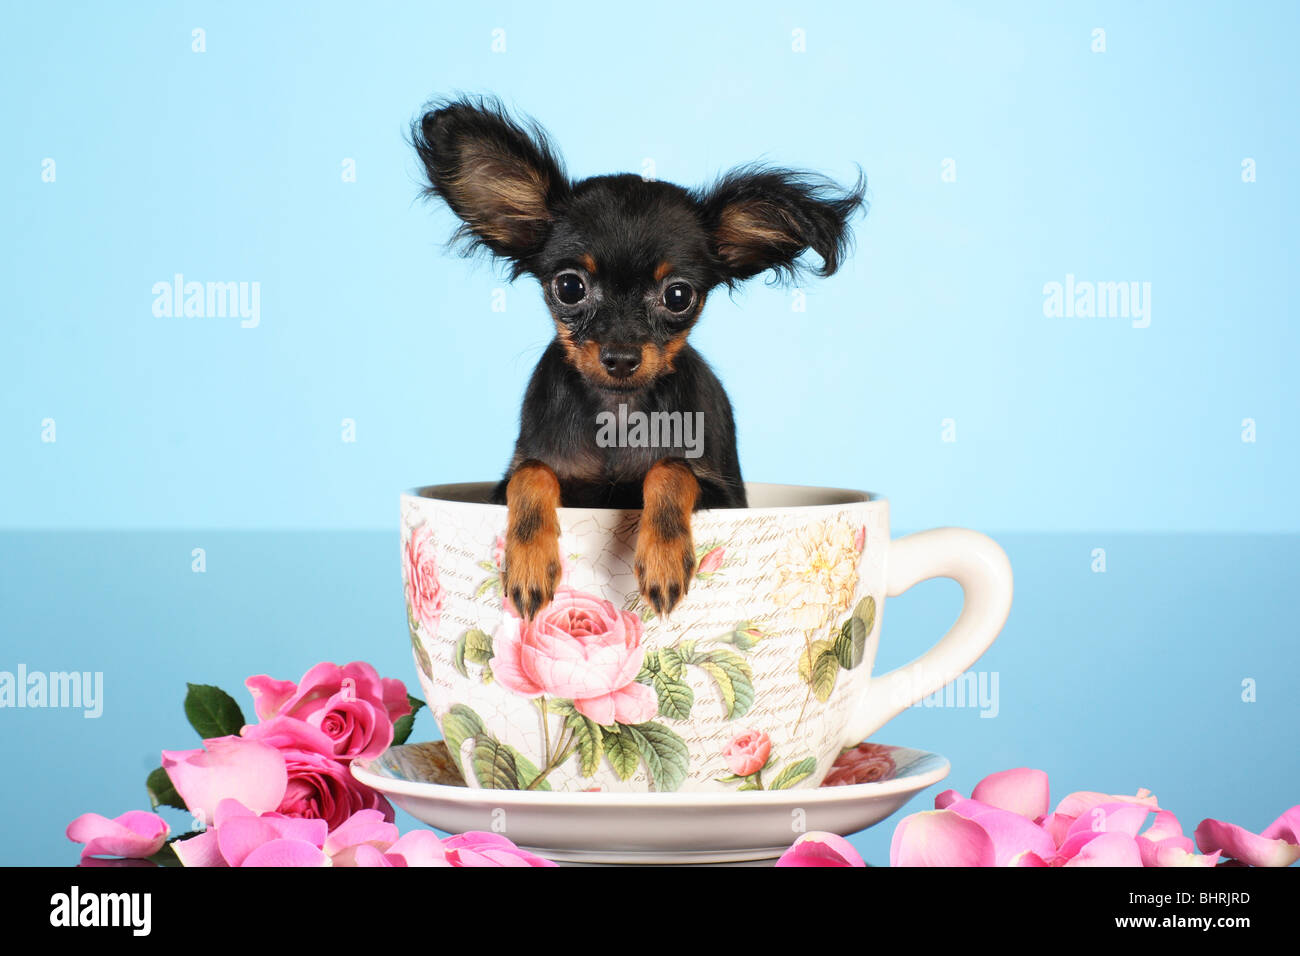 Russian Toy Terrier dog - puppy in a cup Stock Photo